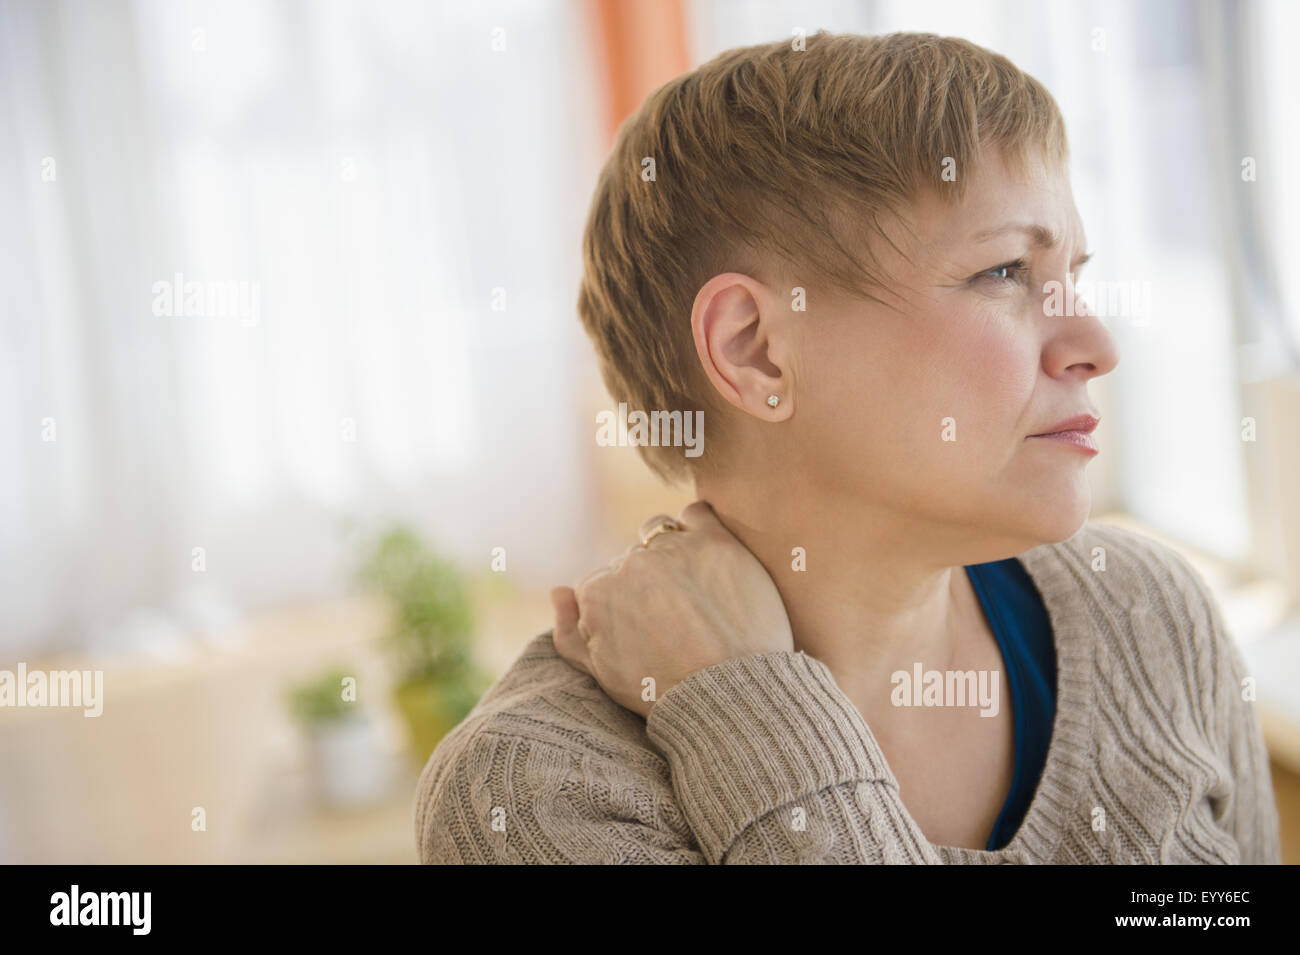 Anxieux Caucasian woman rubbing her neck Banque D'Images